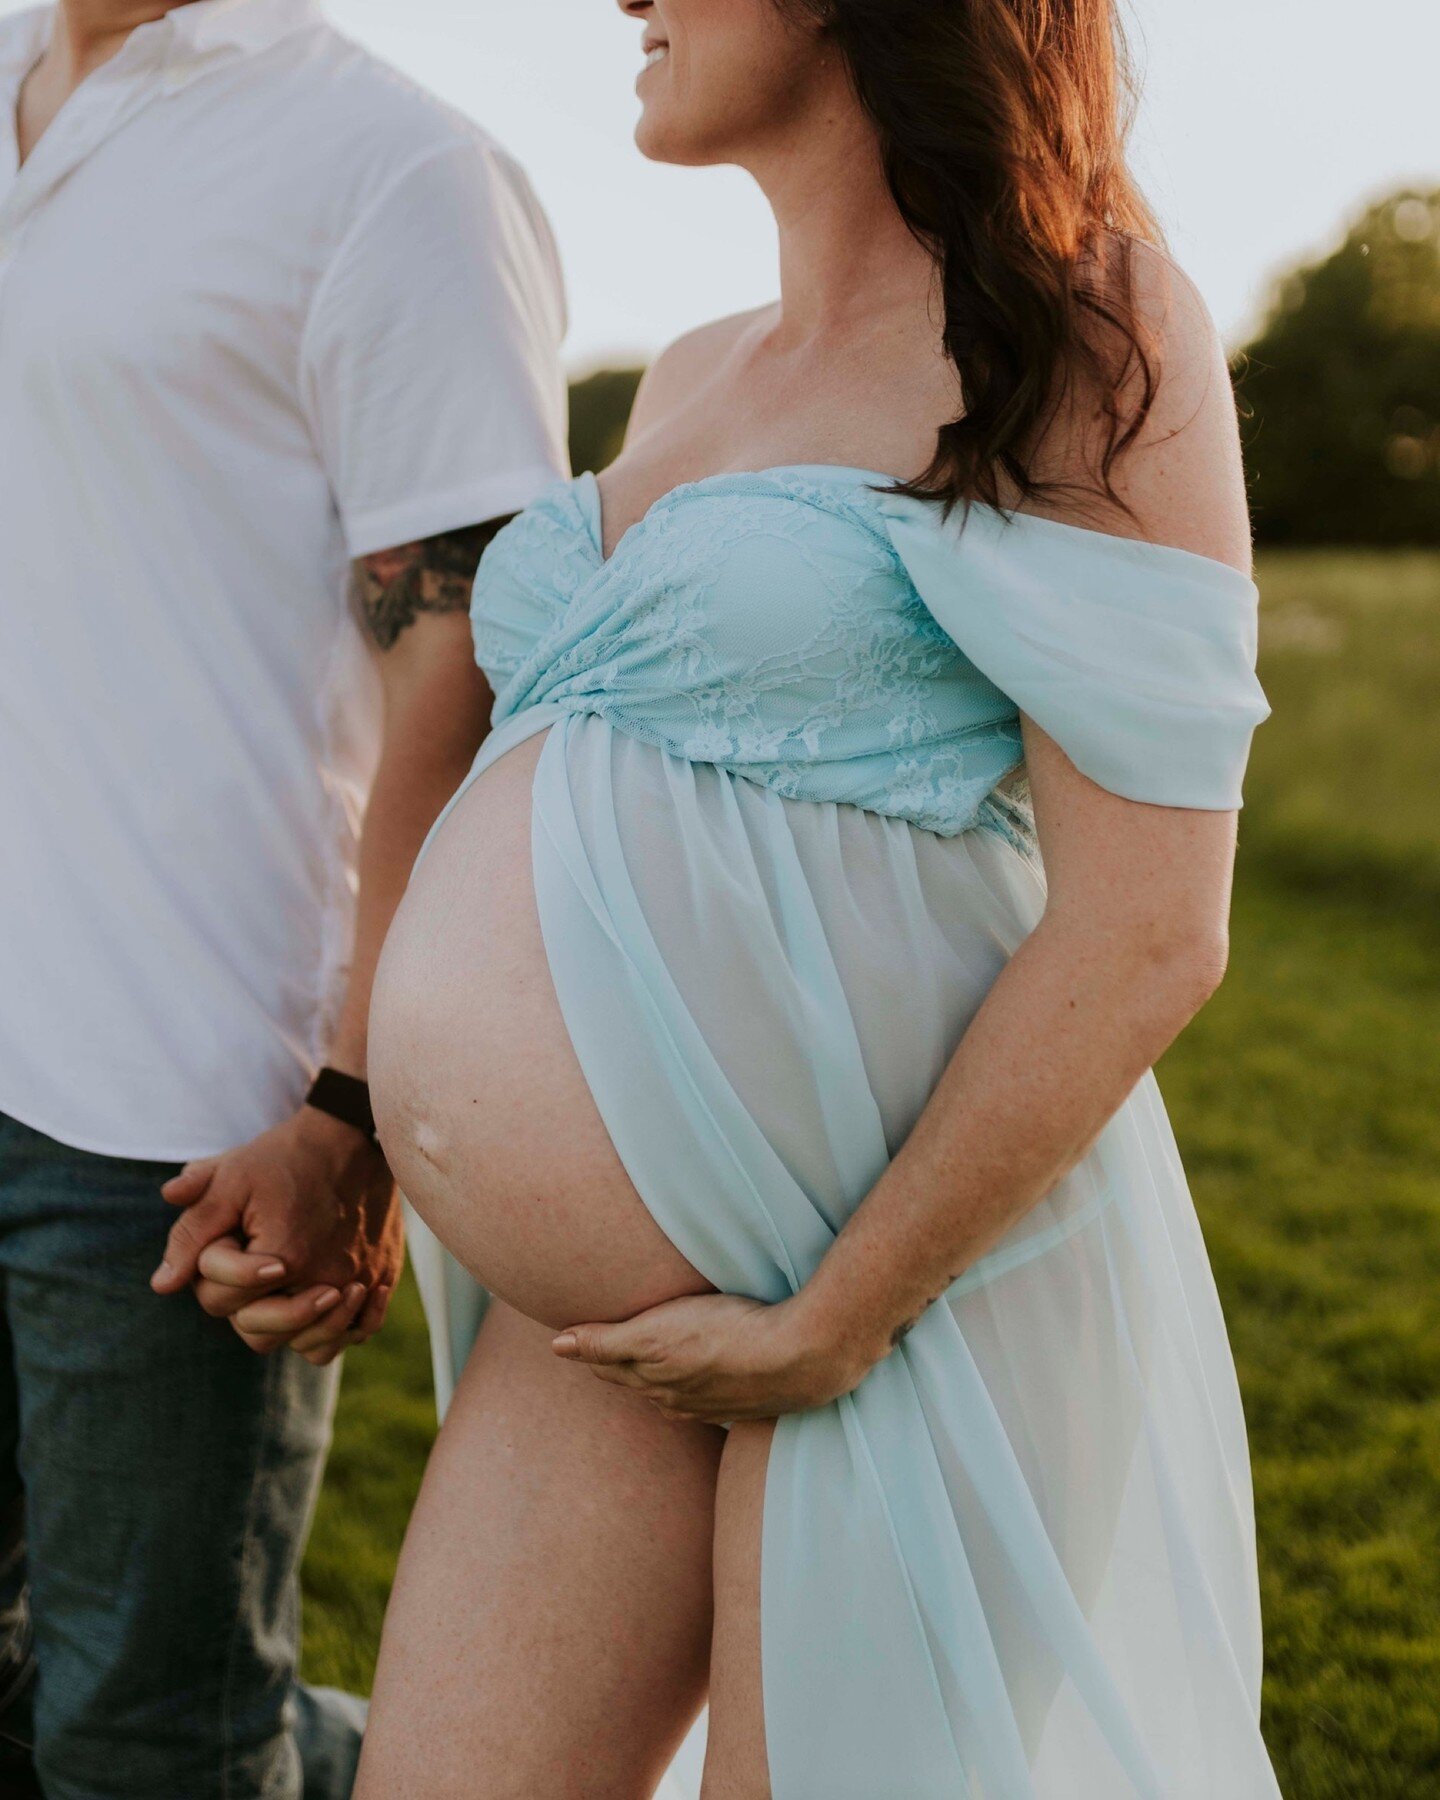 Baby bumps and golden hour! Steph is such a stunning mother 🤍 Baby number 3 to add into the family and the first boy! Such a special time for this fam! 
.
.
.
#maternityphotography #pregnant #familyphotos #babyphotography #bumpstyle #maternityphotog